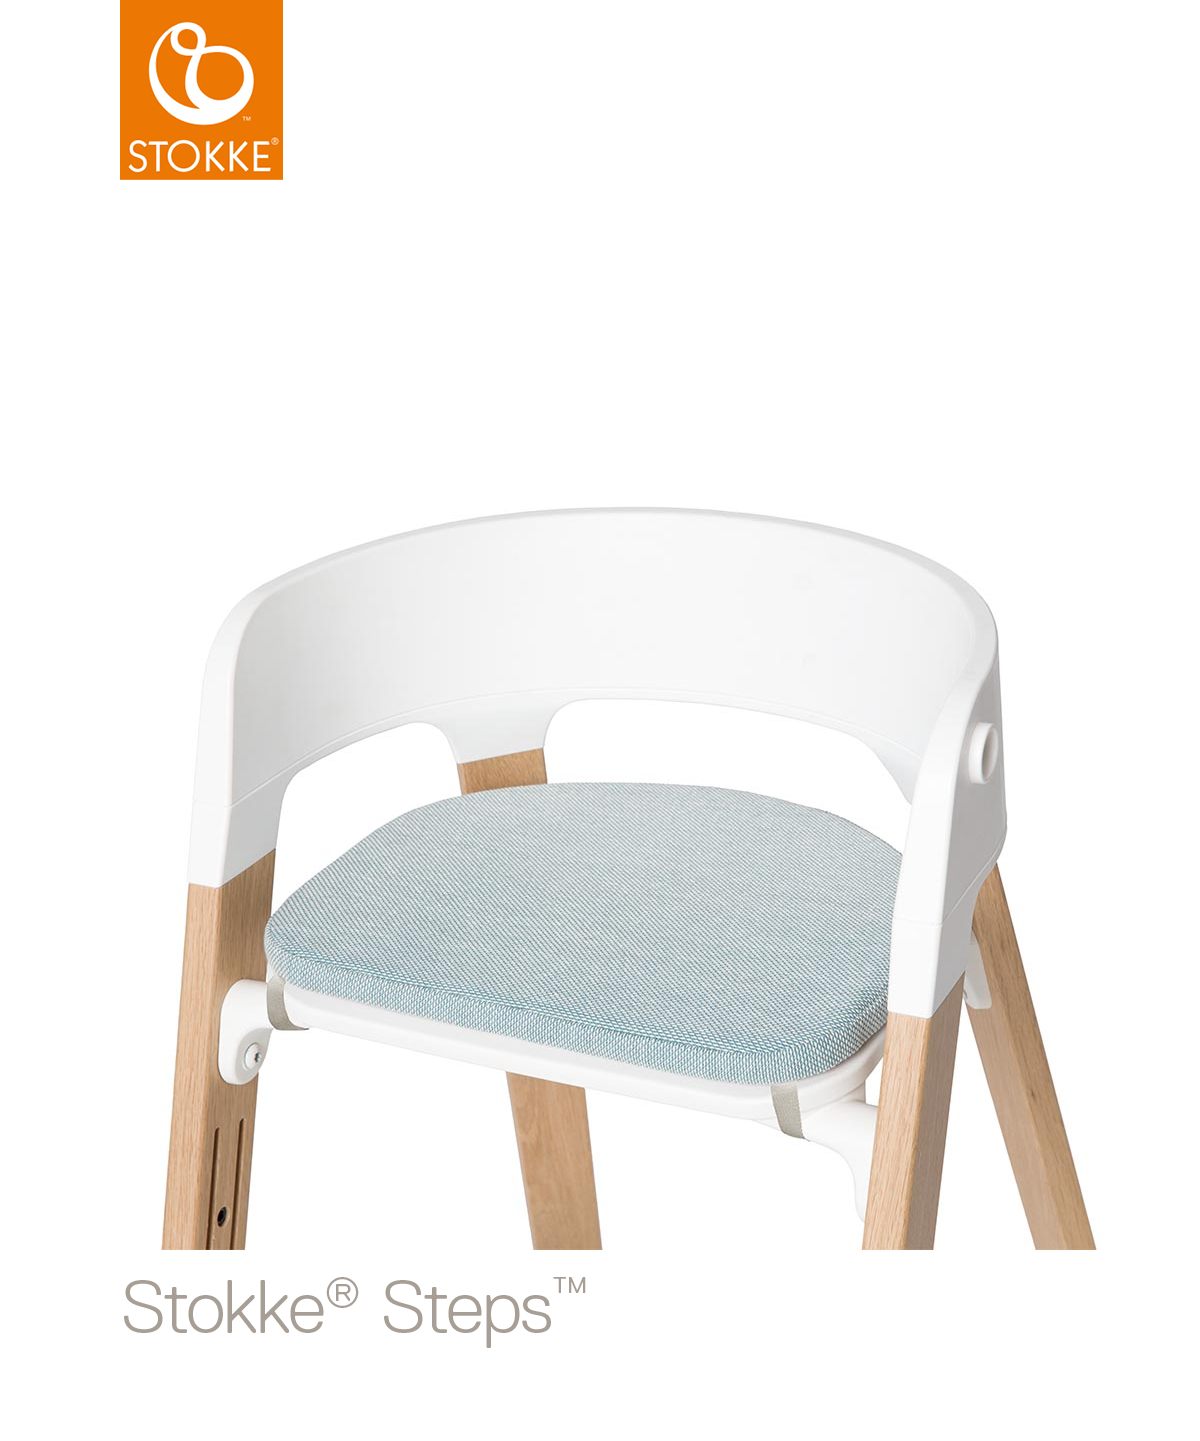 Order the Stokke® Steps™ Chair Cushion 